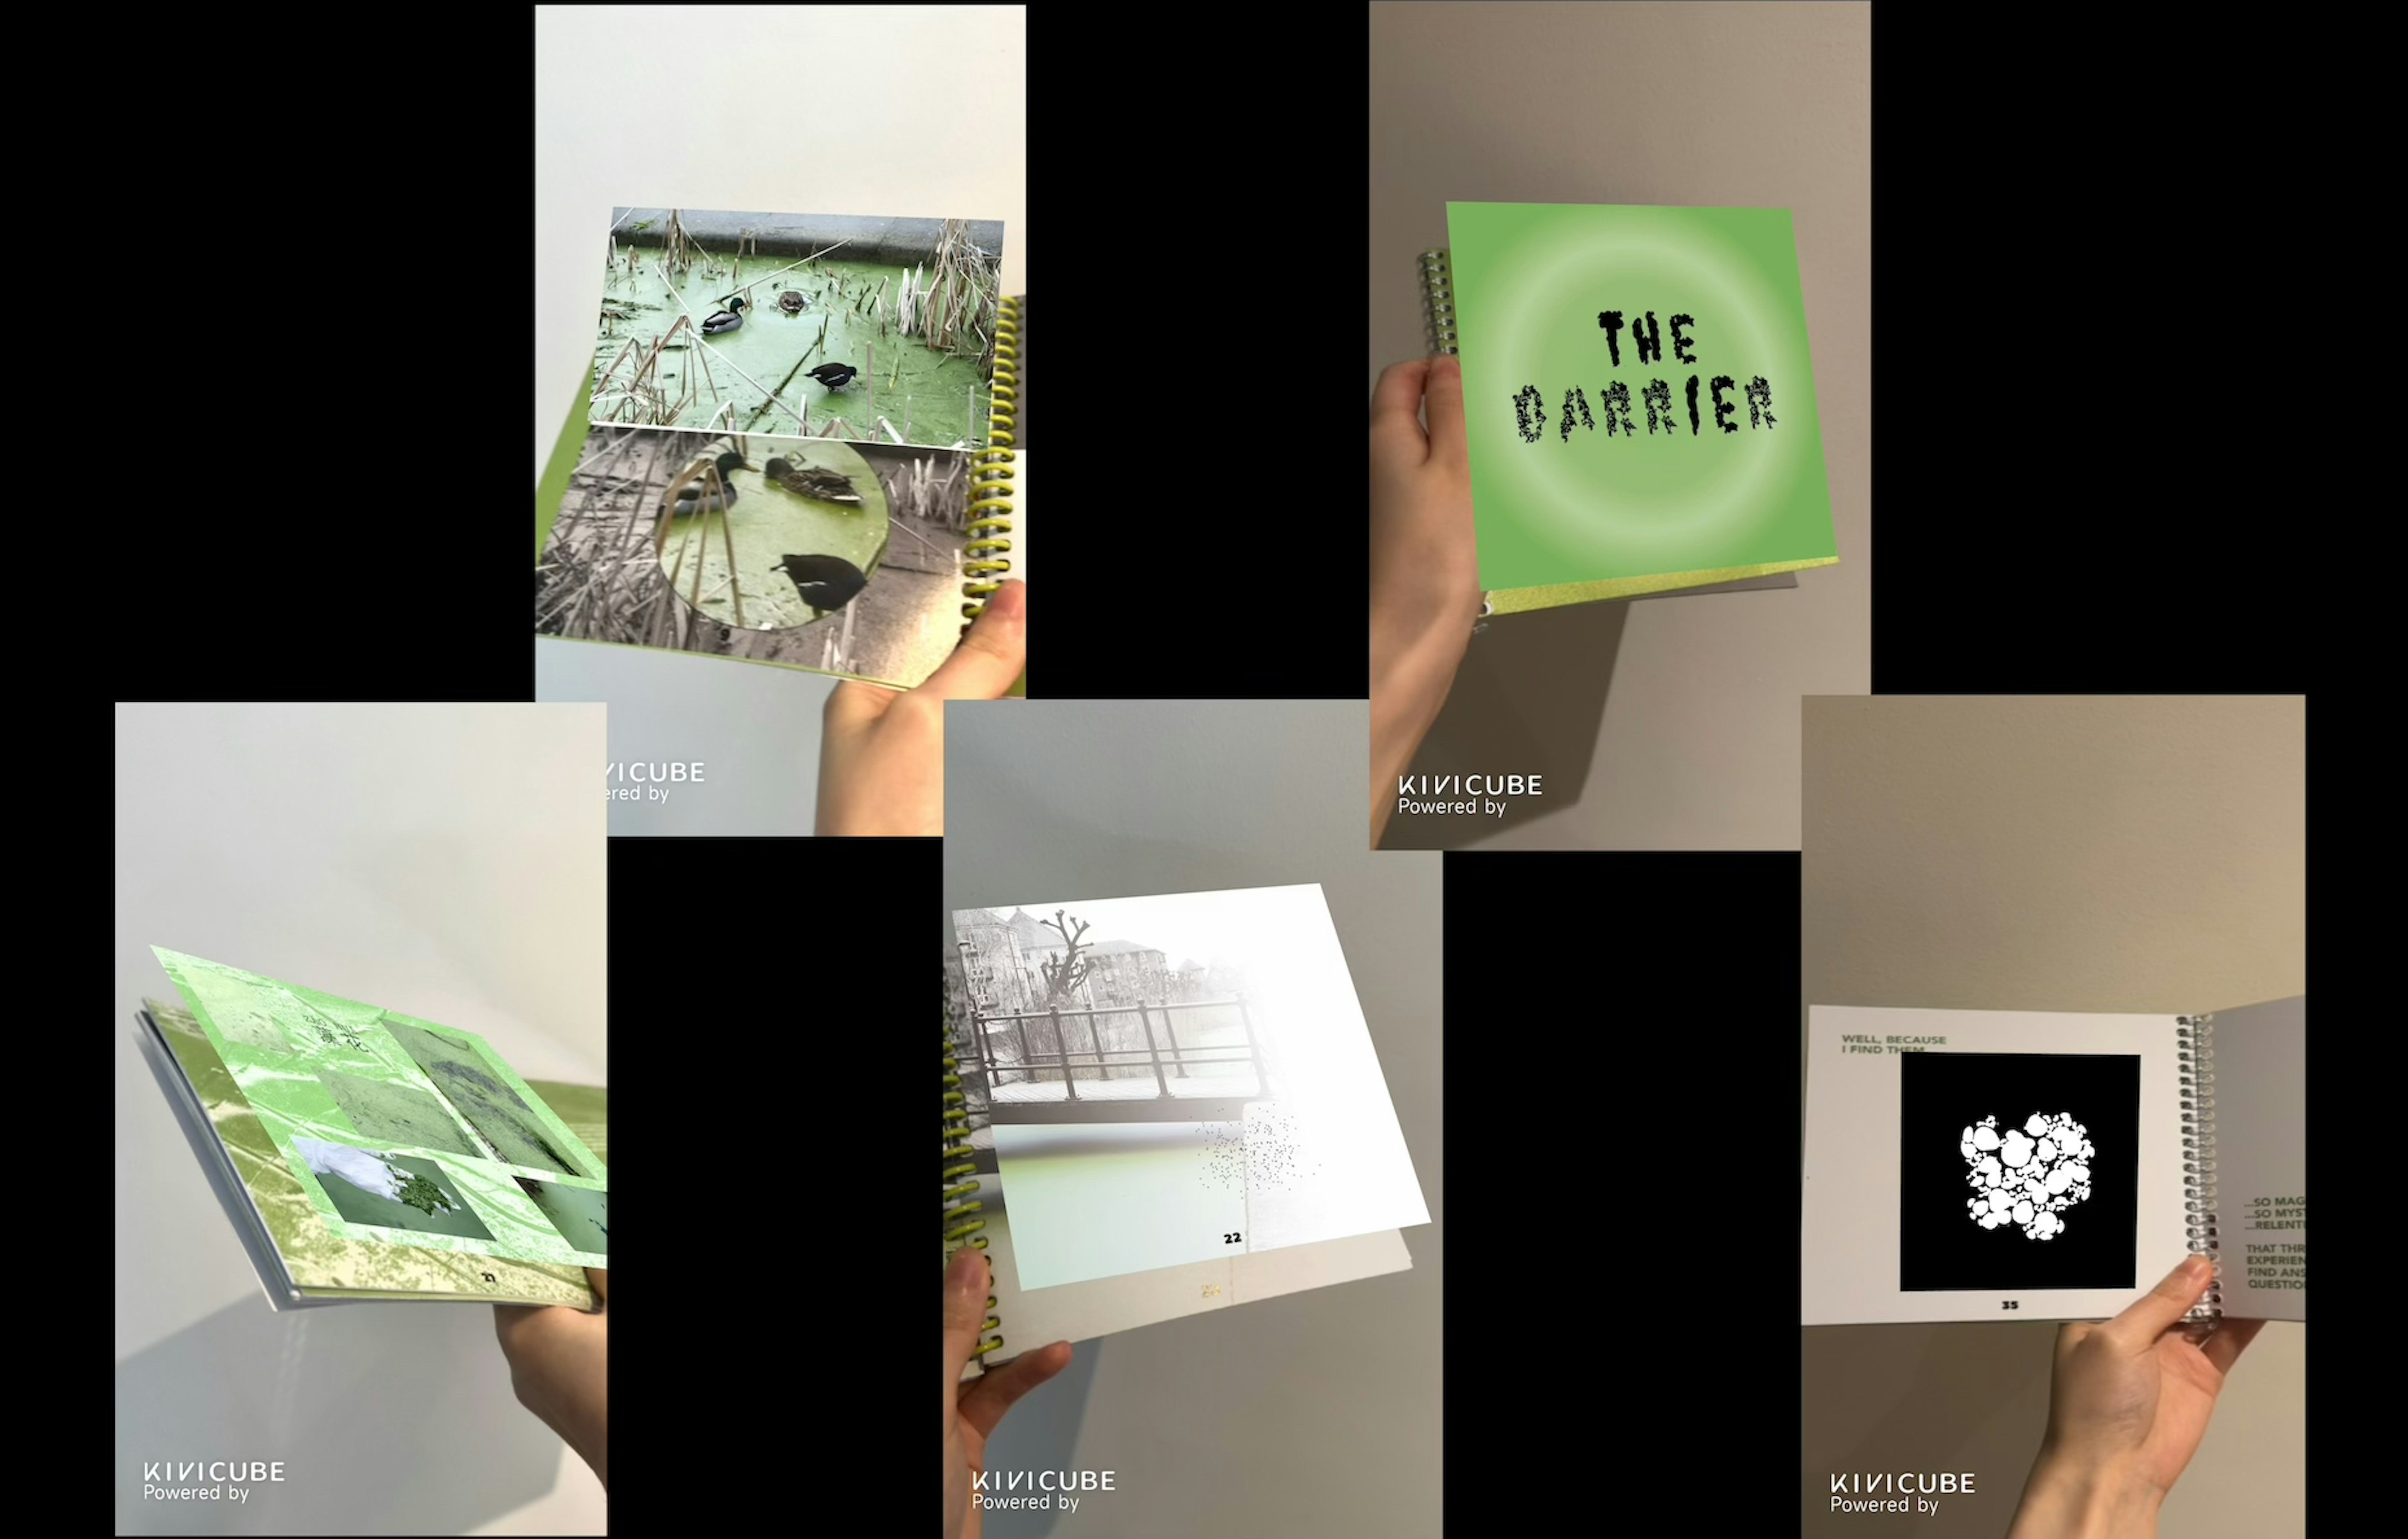 The AR interactive part of the book features image recognition by scanning a QR code. Production platform: Kivicube.